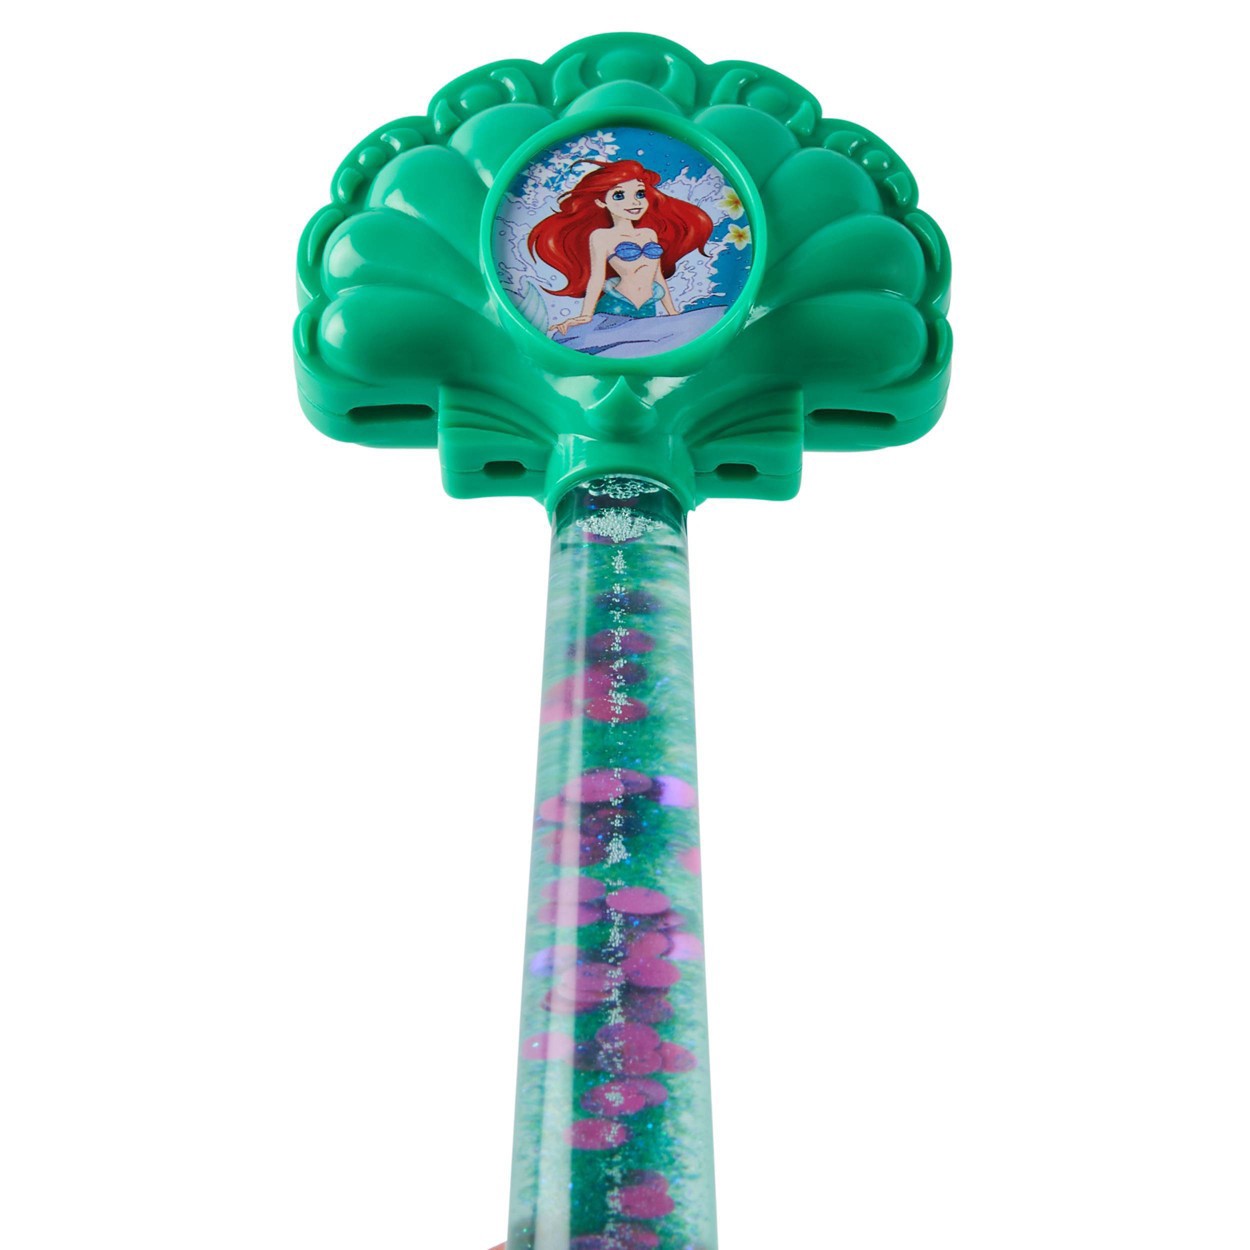 Swimways Disney Ariel Glitter Dive Characters And Wands 1 Ct Shipt 5103